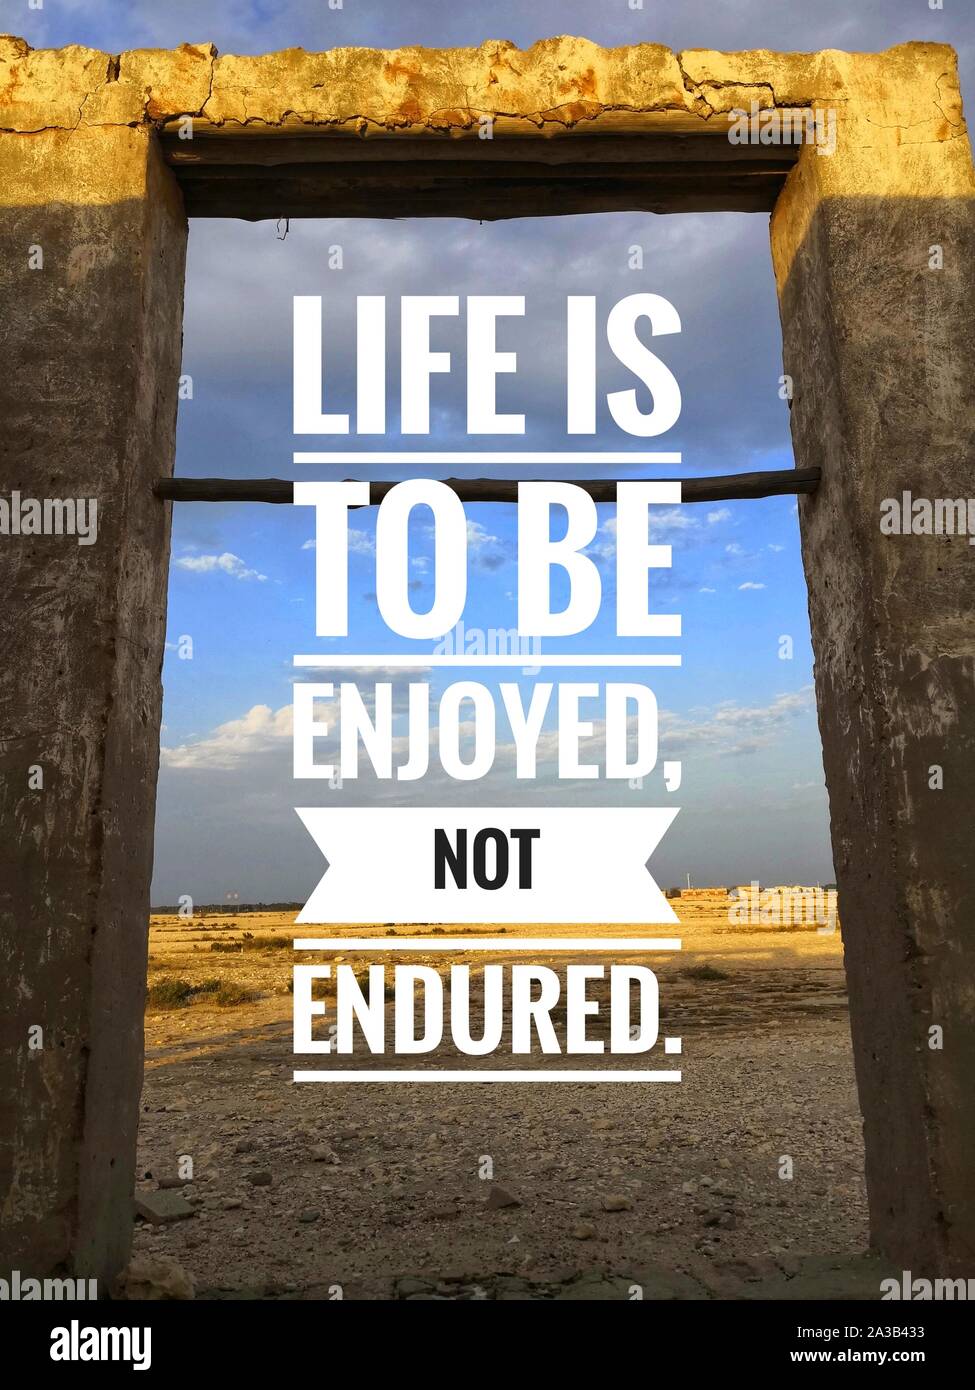 Motivational and inspirational quote - Life is to be enjoyed, not endured. Stock Photo